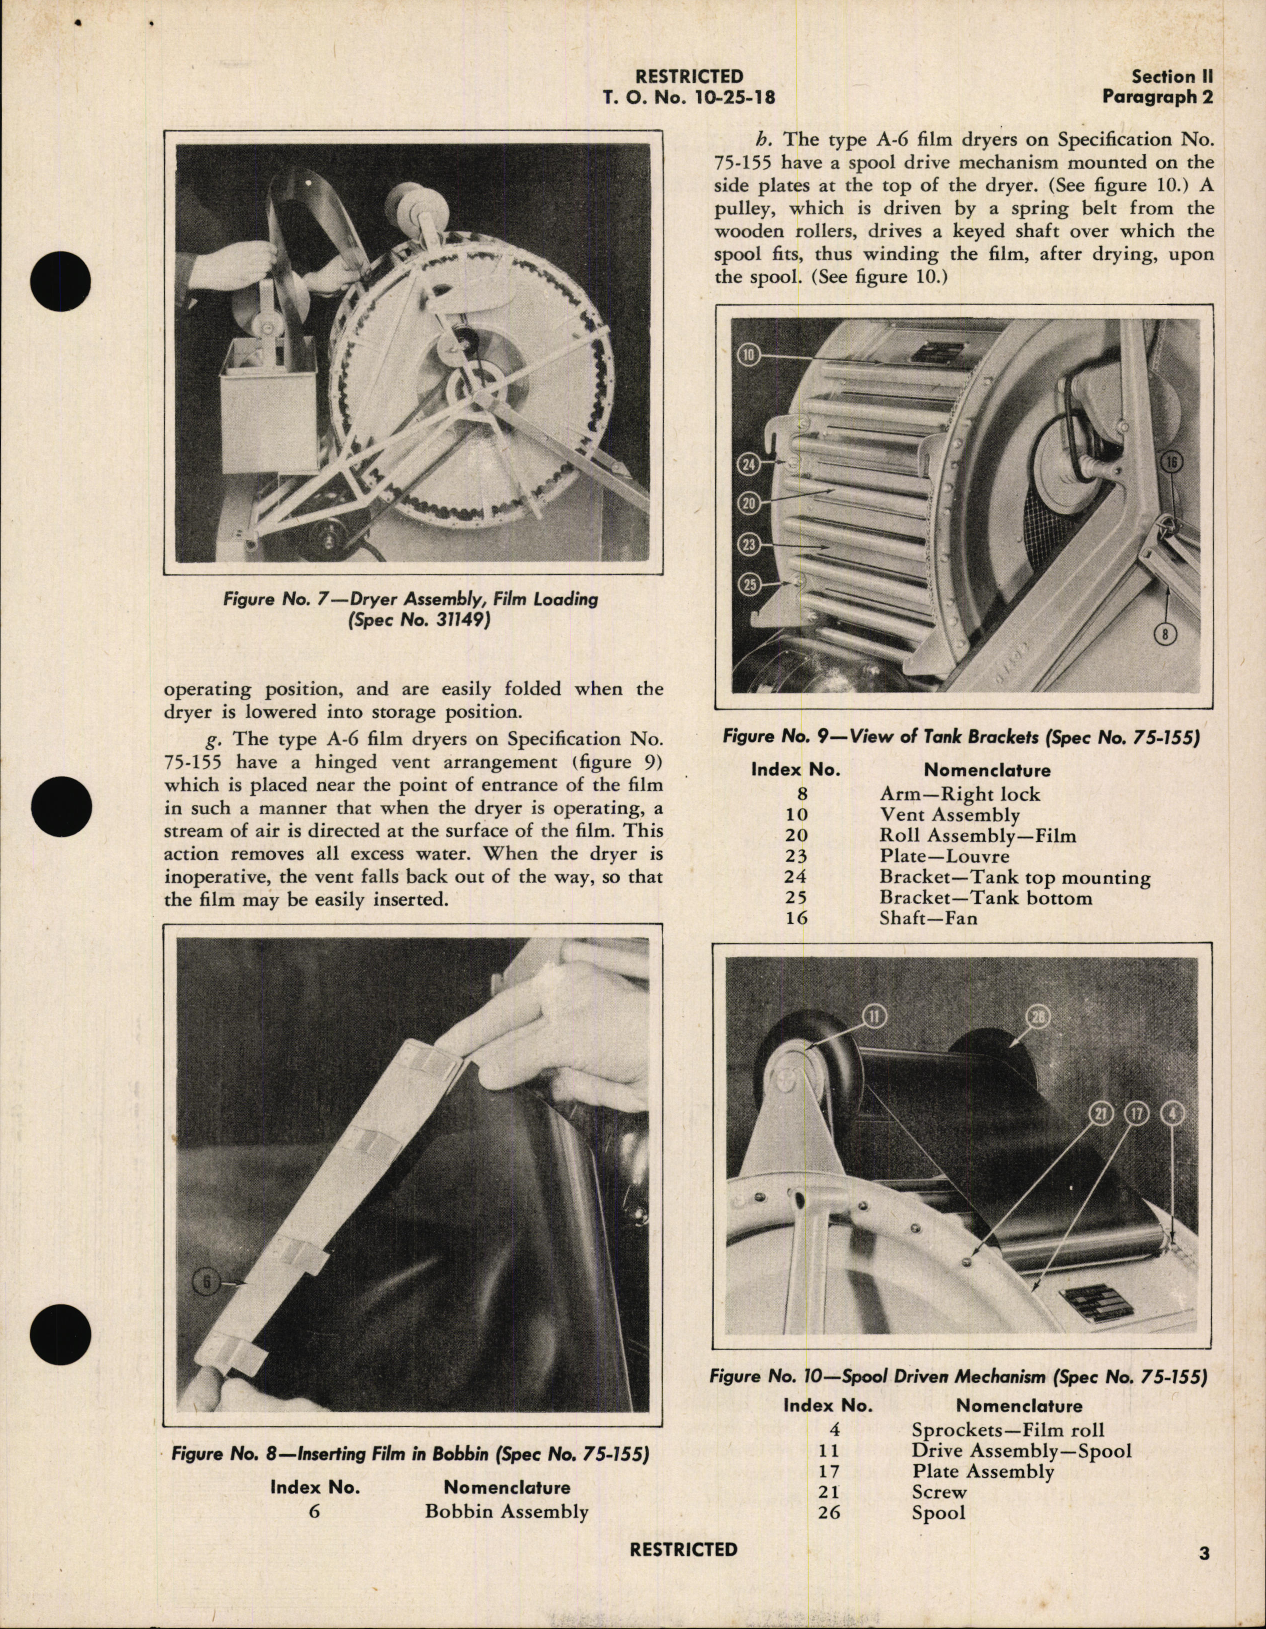 Sample page 7 from AirCorps Library document: Handbook of Instructions with Parts Catalog for Type A-6 Roll Film Dryer